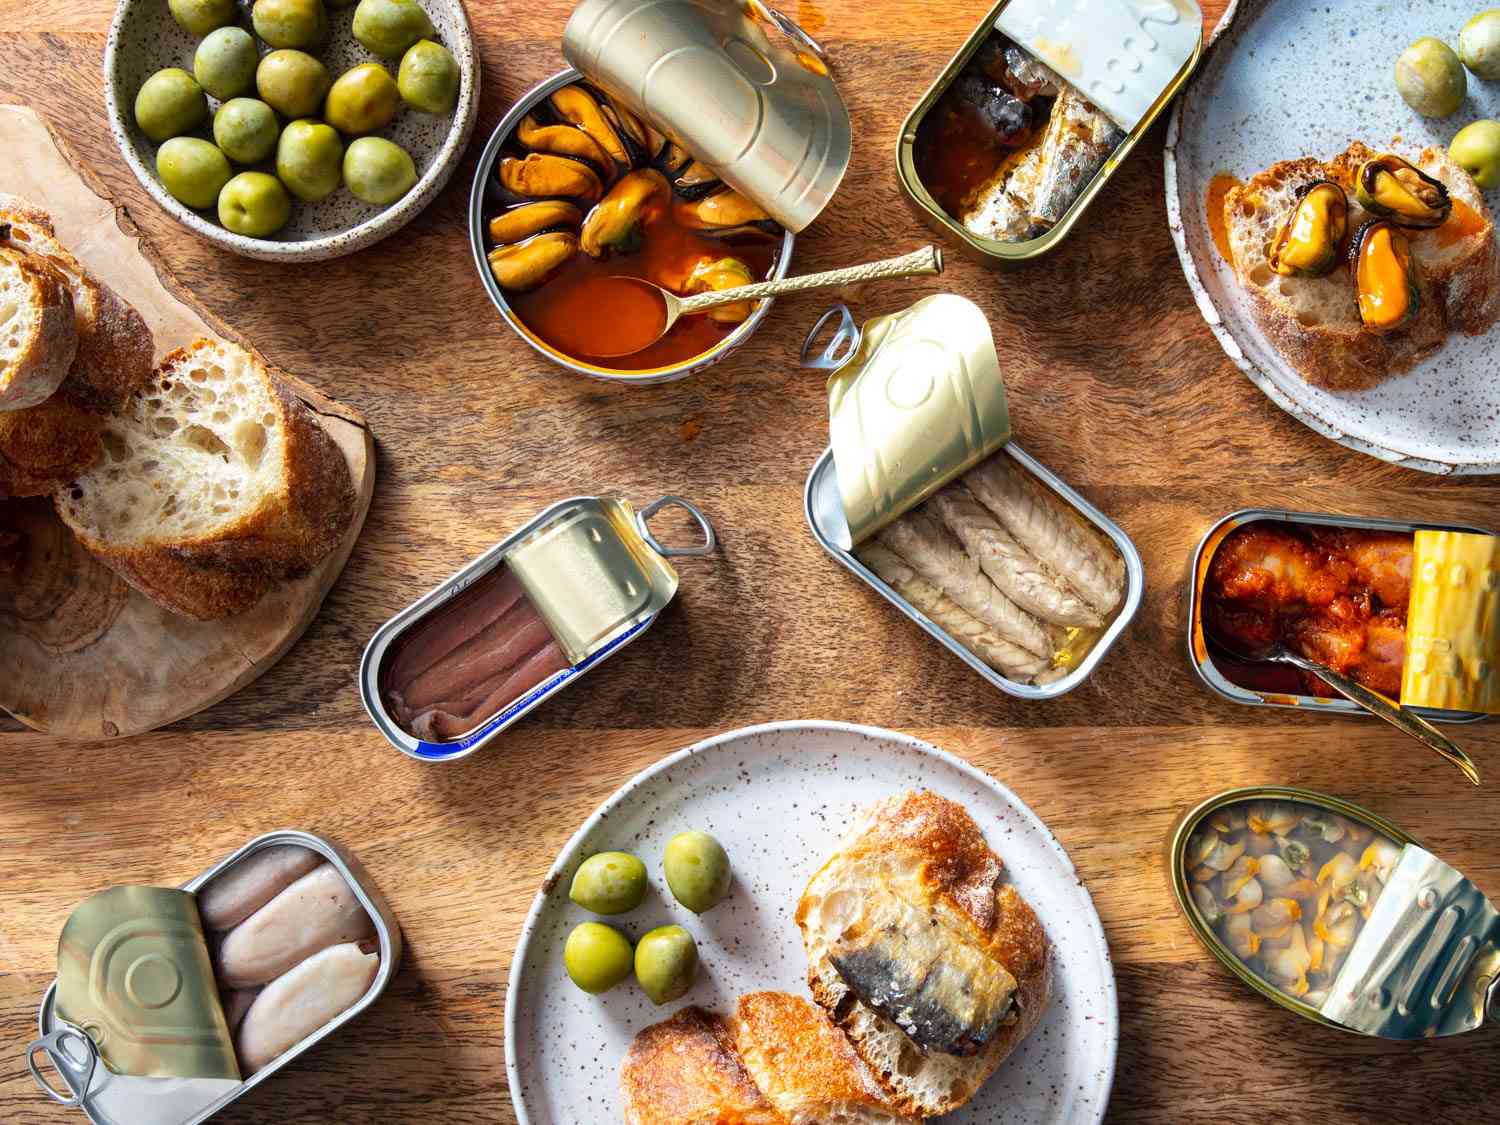 Overhead shot of an array of tinned fish, or conservas, on a wooden table with bread and olives.